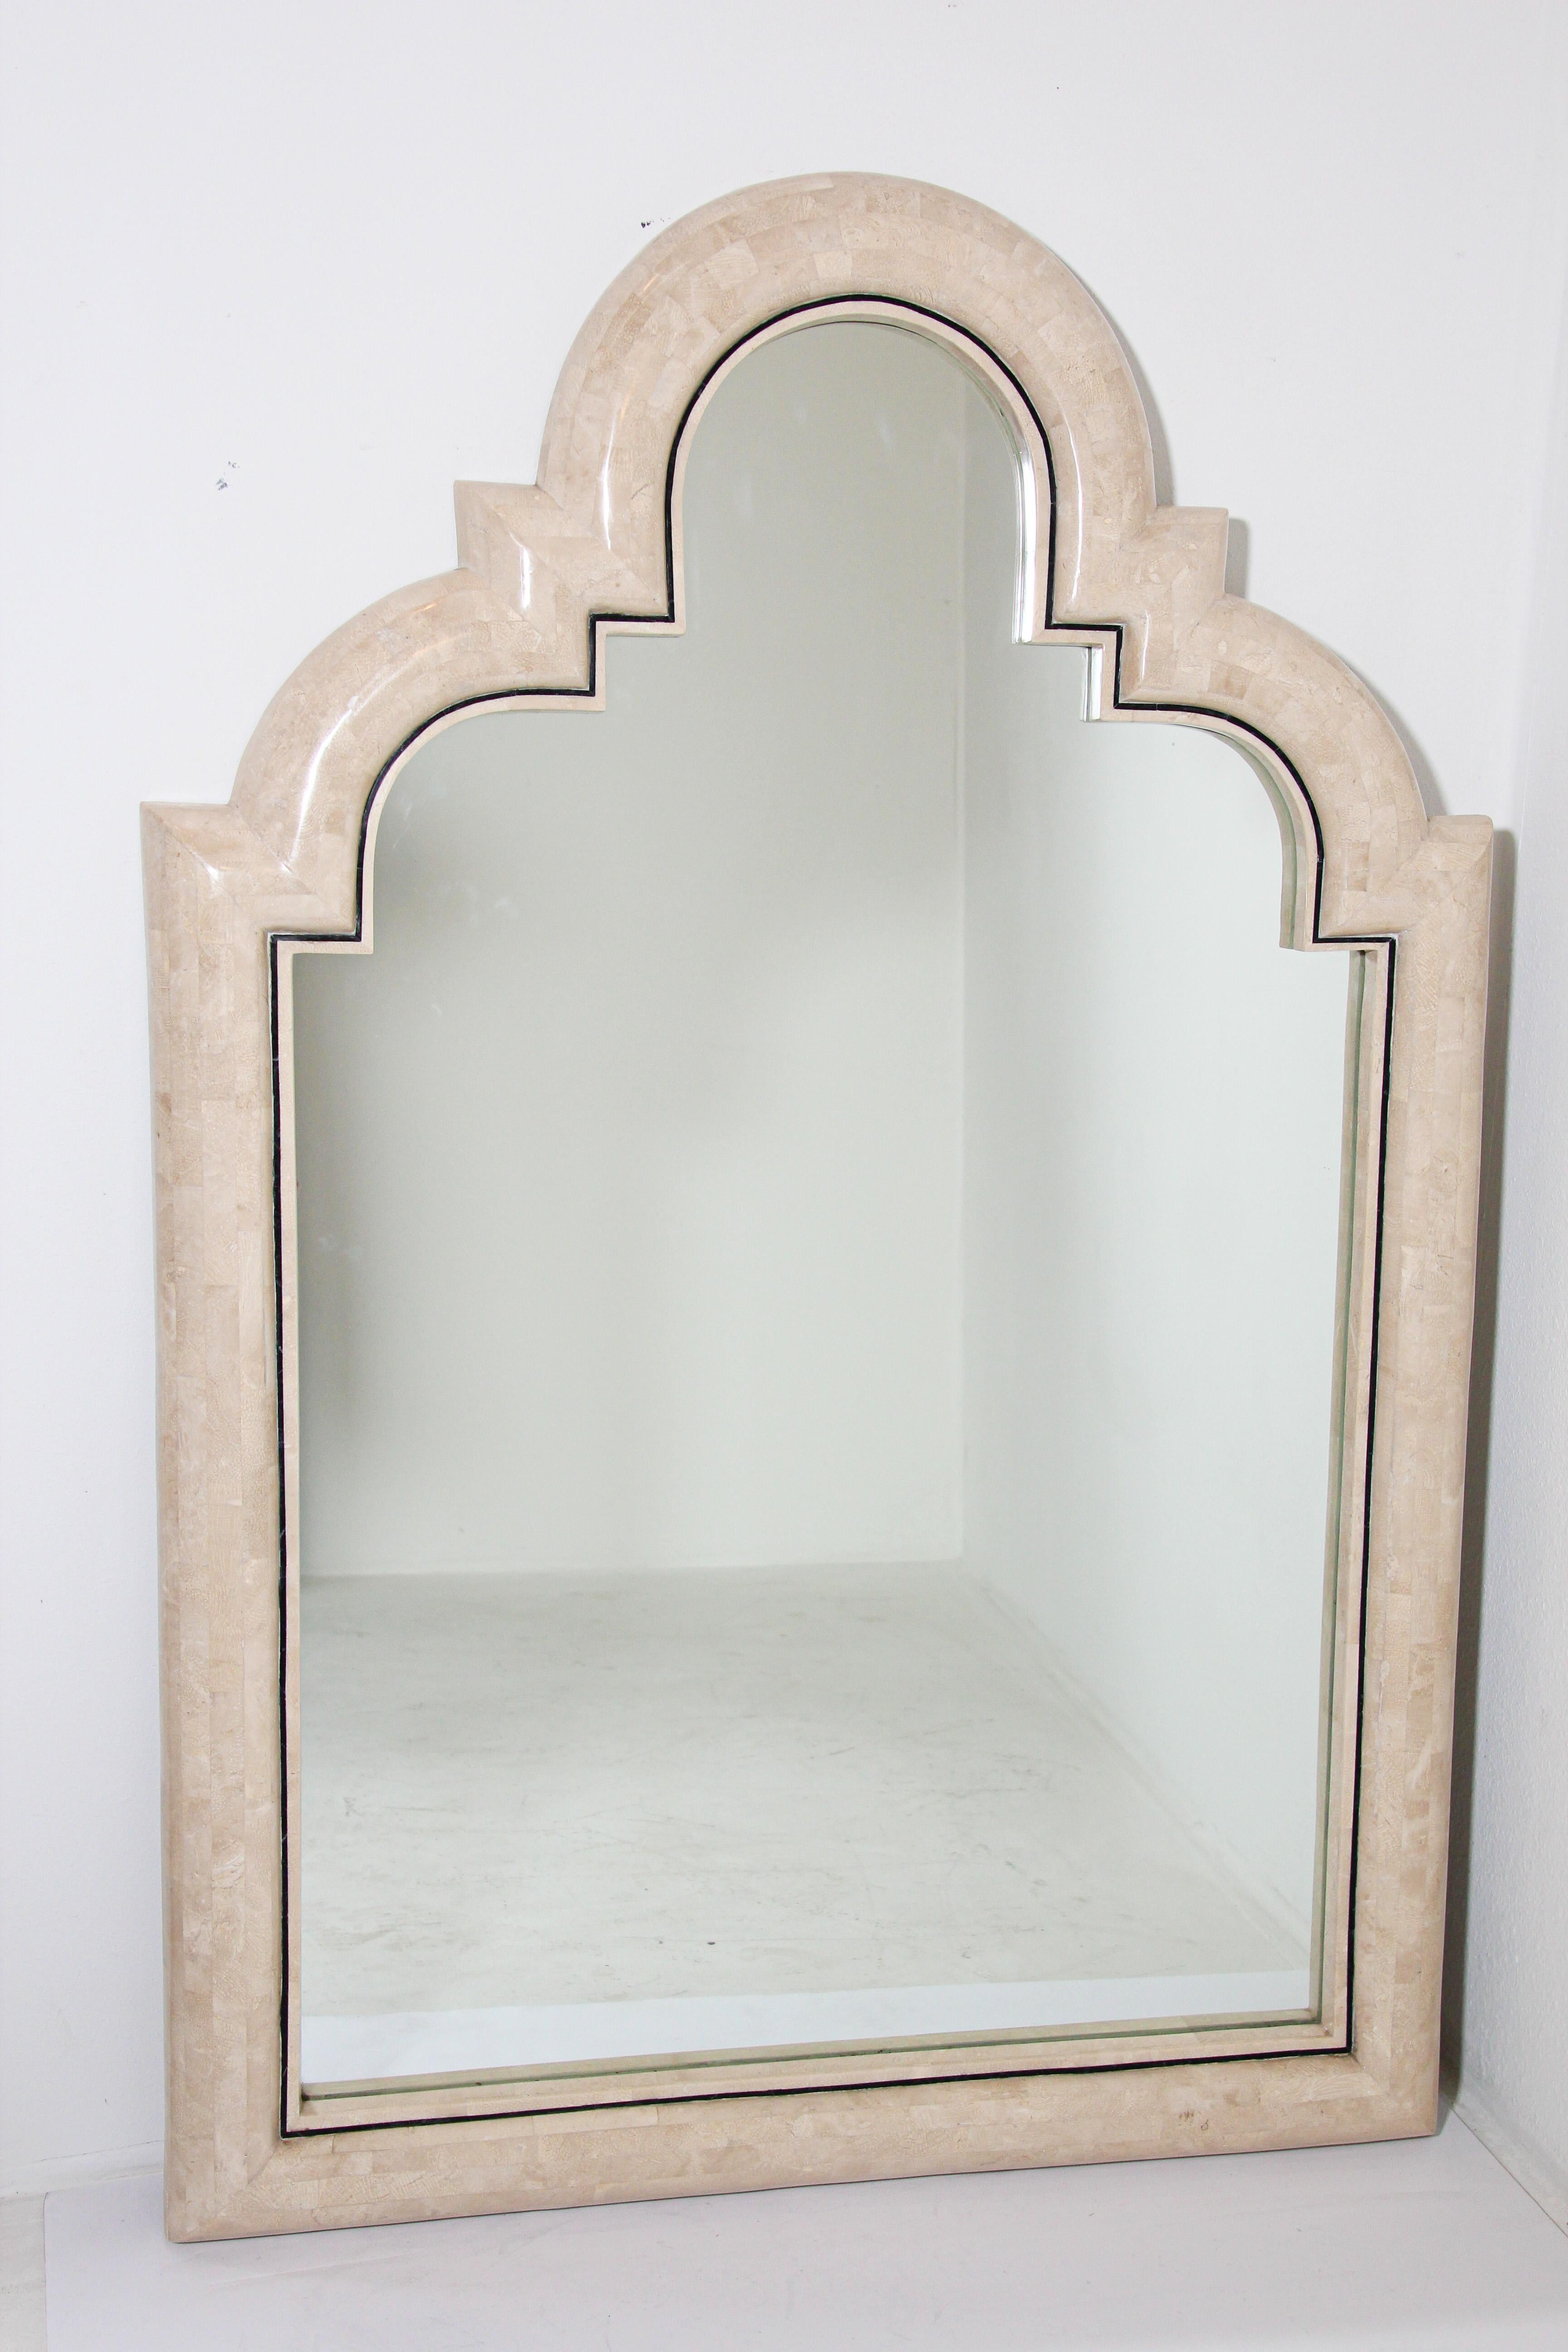 Moroccan Moorish mirror tessellated marble stone by Maitland Smith.
Monumental Moroccan style mirror by Maitland Smith, tessellated marble stone with Moorish arched.
Arched mirror frame veneered Tessellated stone mirror with white vanilla colored